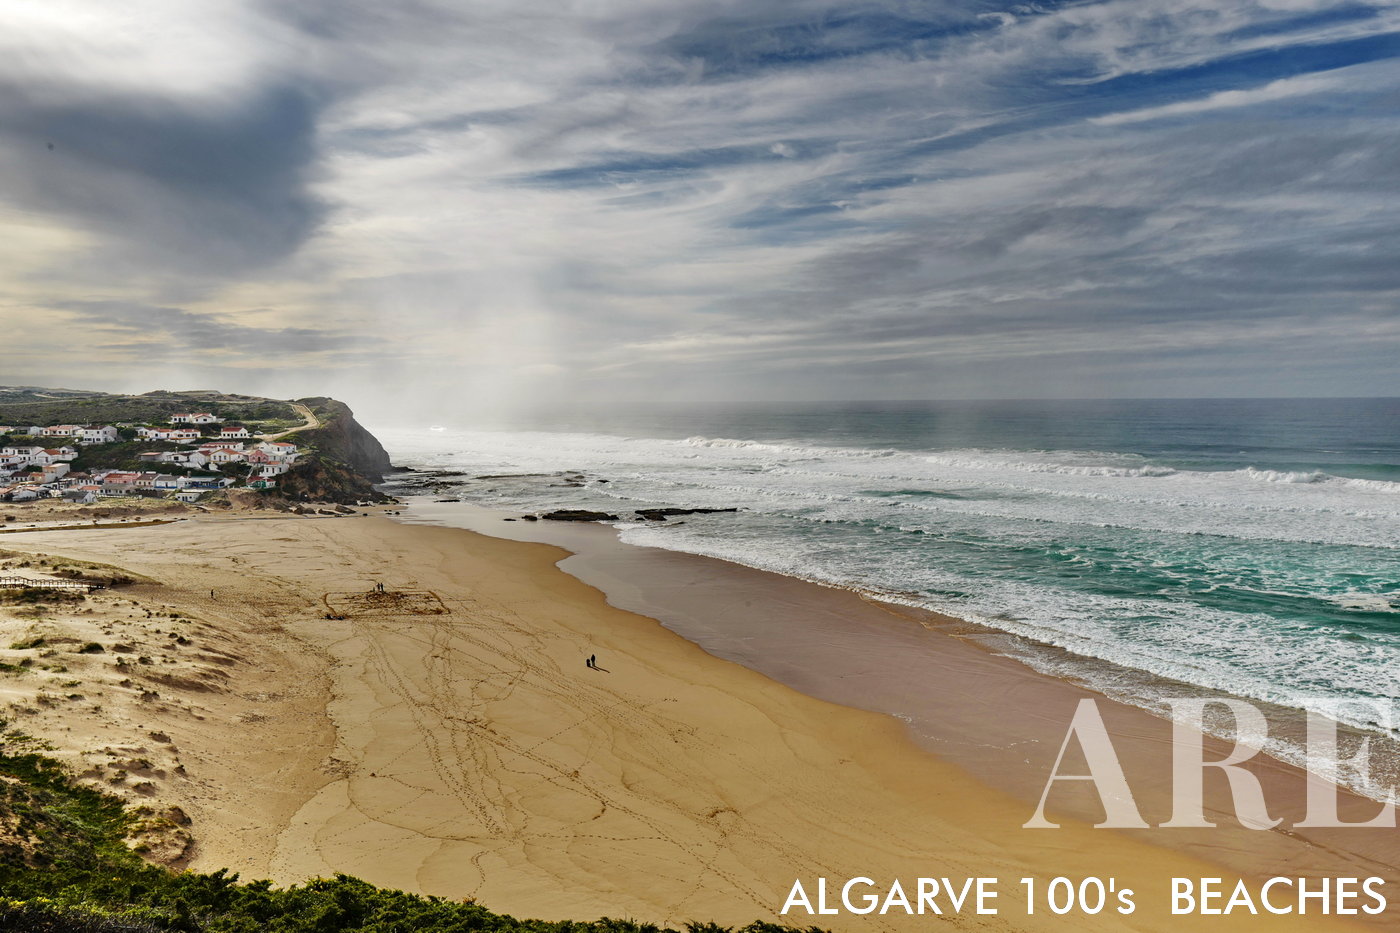 Winter at Monte Clérigo Beach in Algarve, Portugal presents a peaceful setting. The half-moon beach is bordered by a quaint village of houses, offering a scenic backdrop for a brisk walk along the shore.